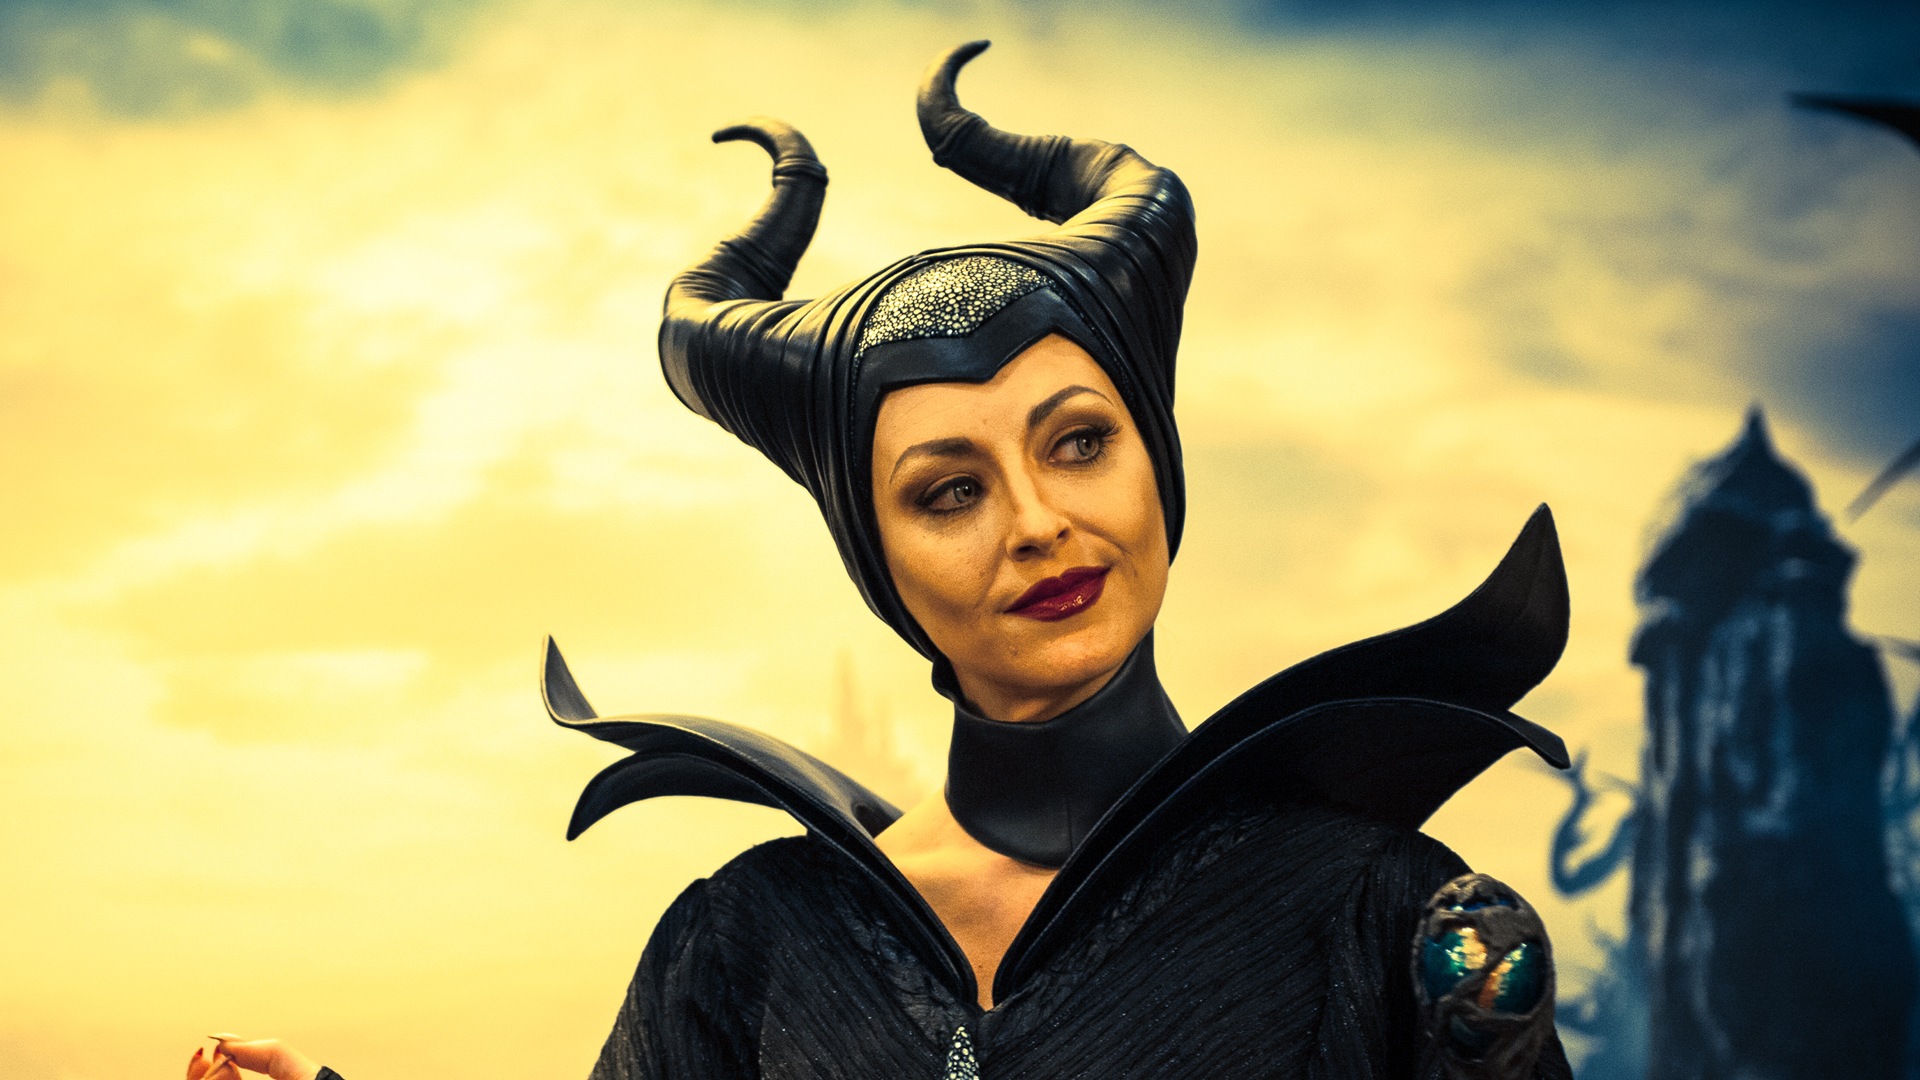 Maleficent 2014 HD movie wallpapers #15 - 1920x1080